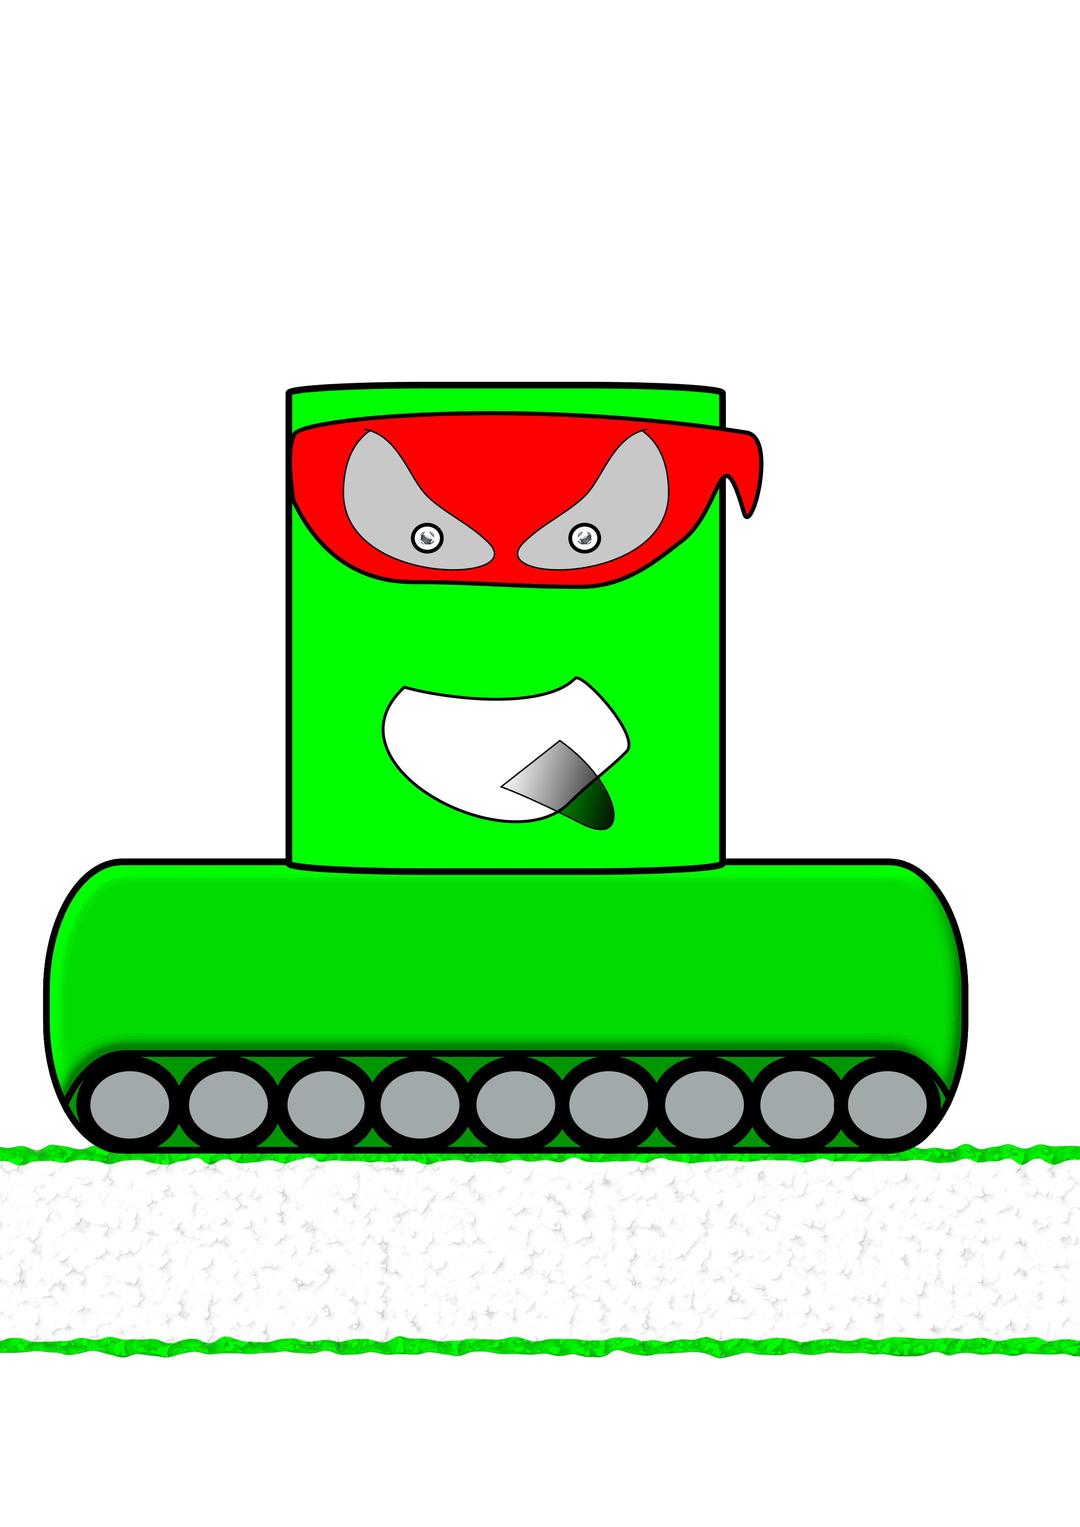 Green Canman Ninja with a continuous track png transparent